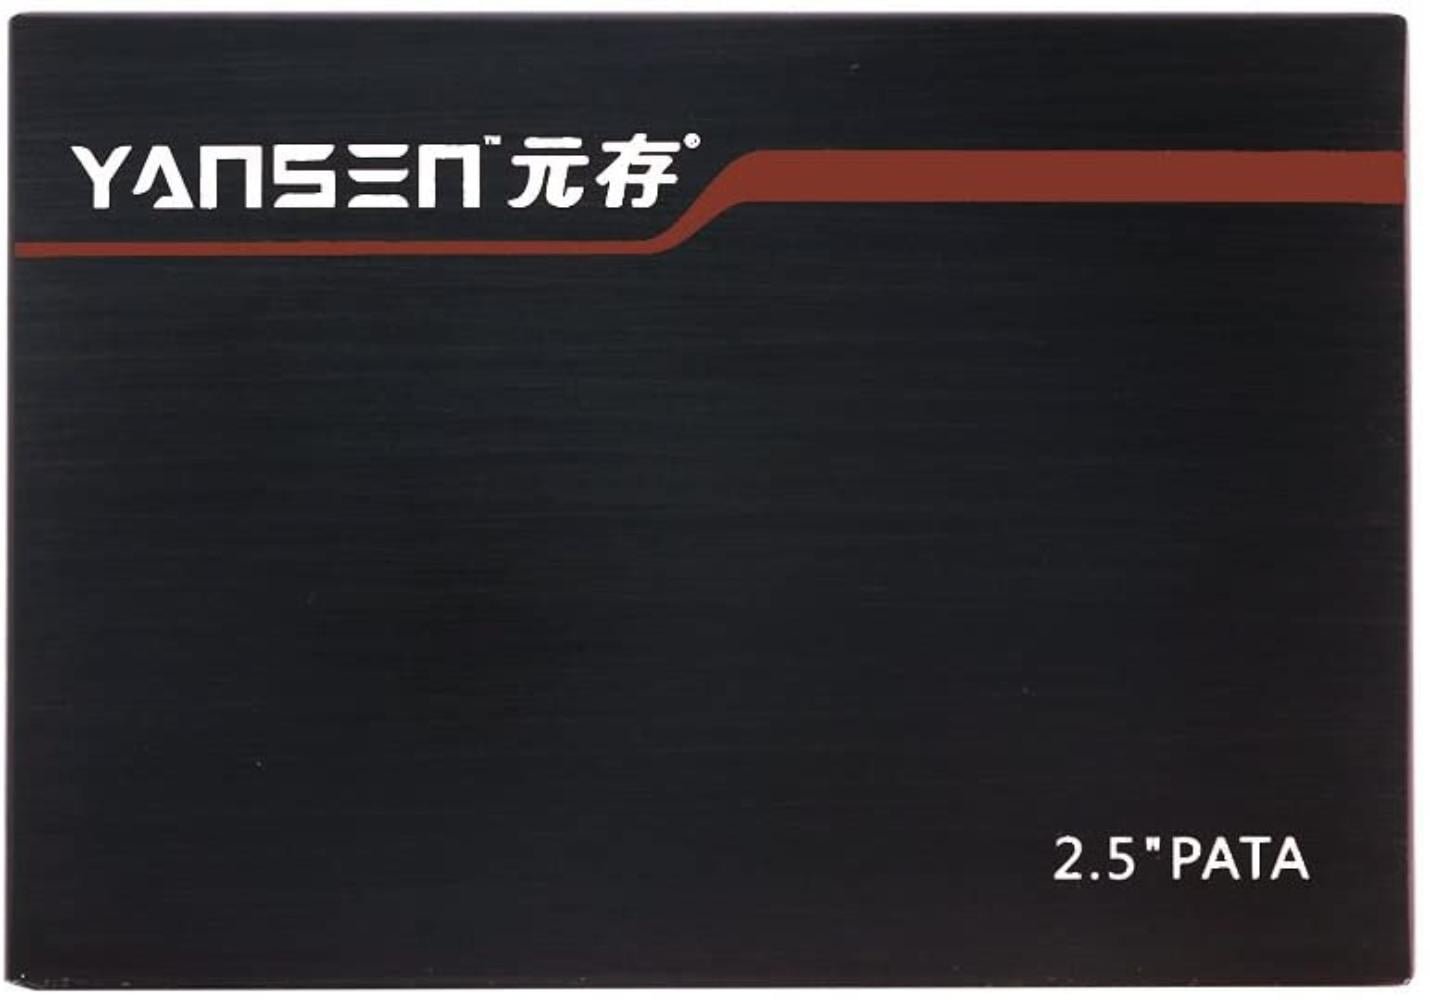 64GB KingSpec 2.5-inch PATA/IDE SSD Solid State Disk (MLC SM2236 Controller, 64GB Solid State Disk Visit KingSpec Store - Walmart.com